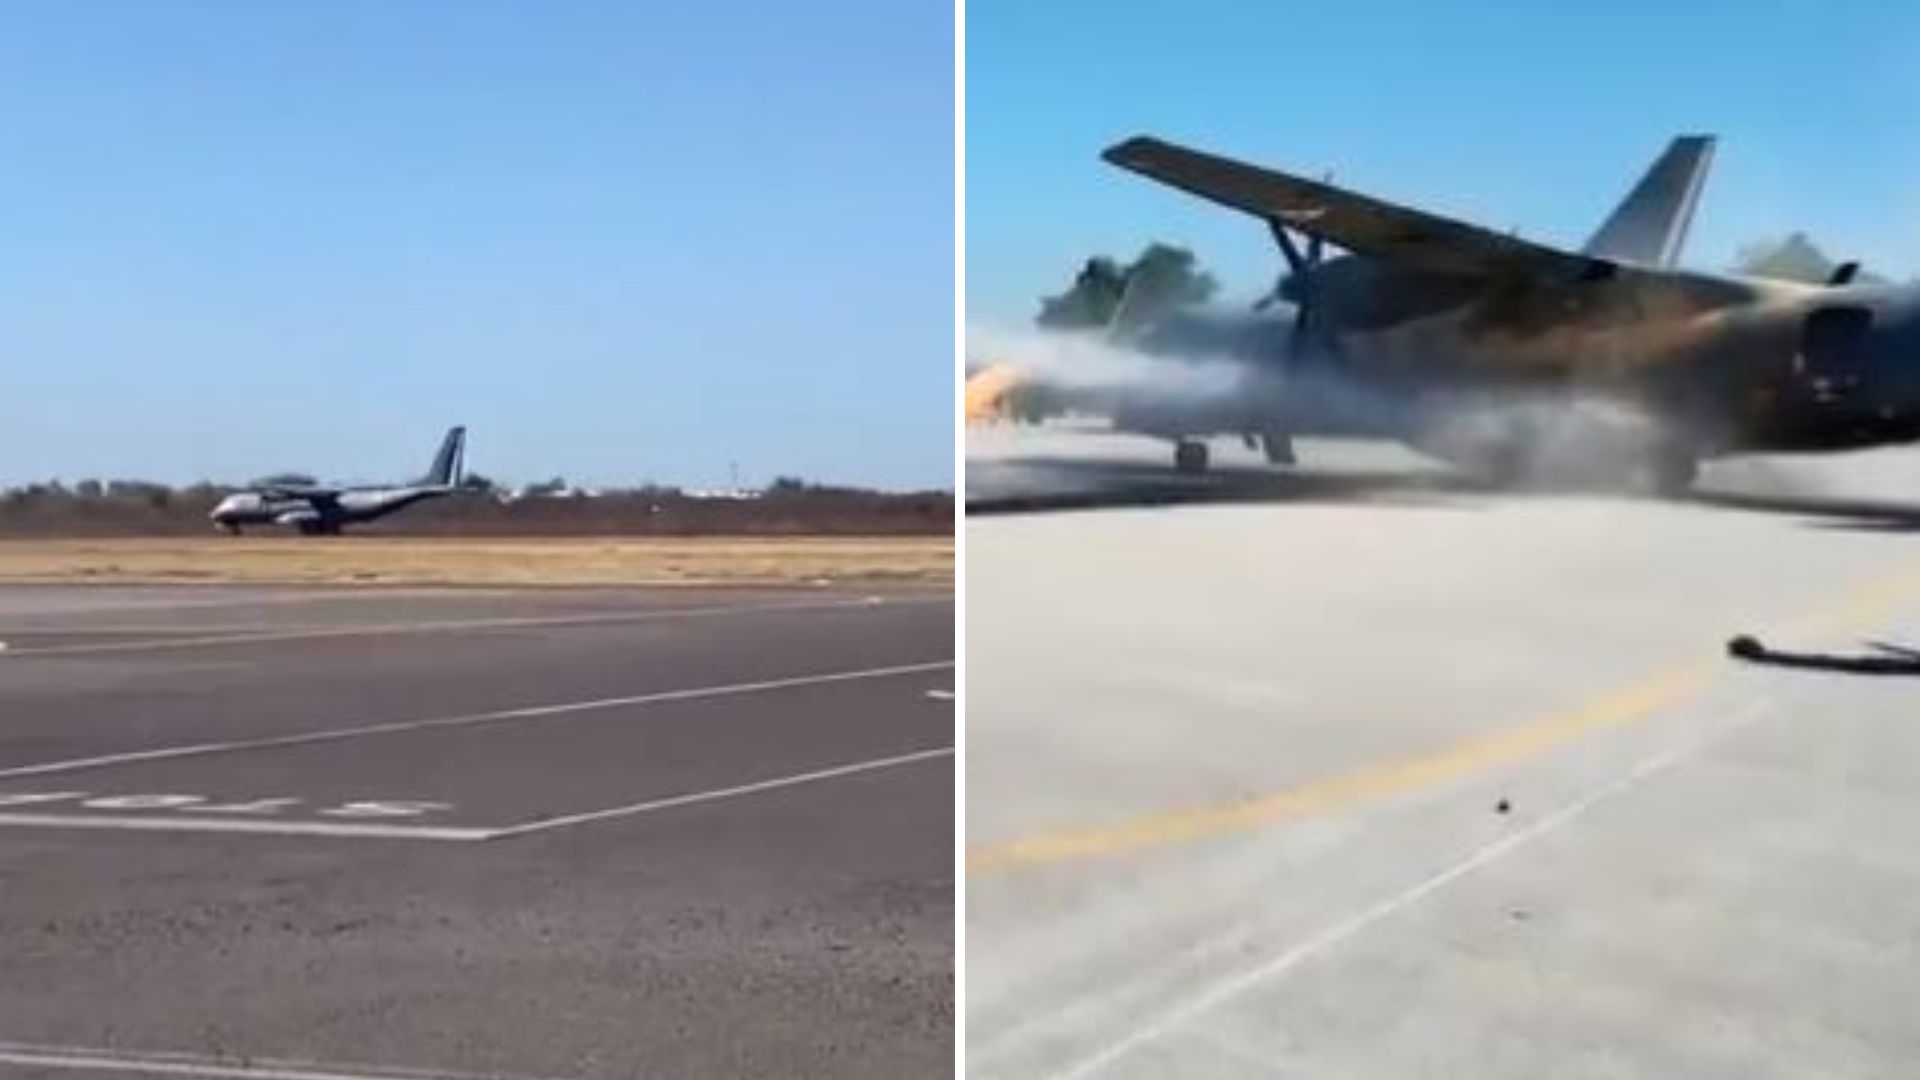 One of the Mexican Air Force planes had to land without an engine after attacks in Culiacán (Screenshots/Twitter)